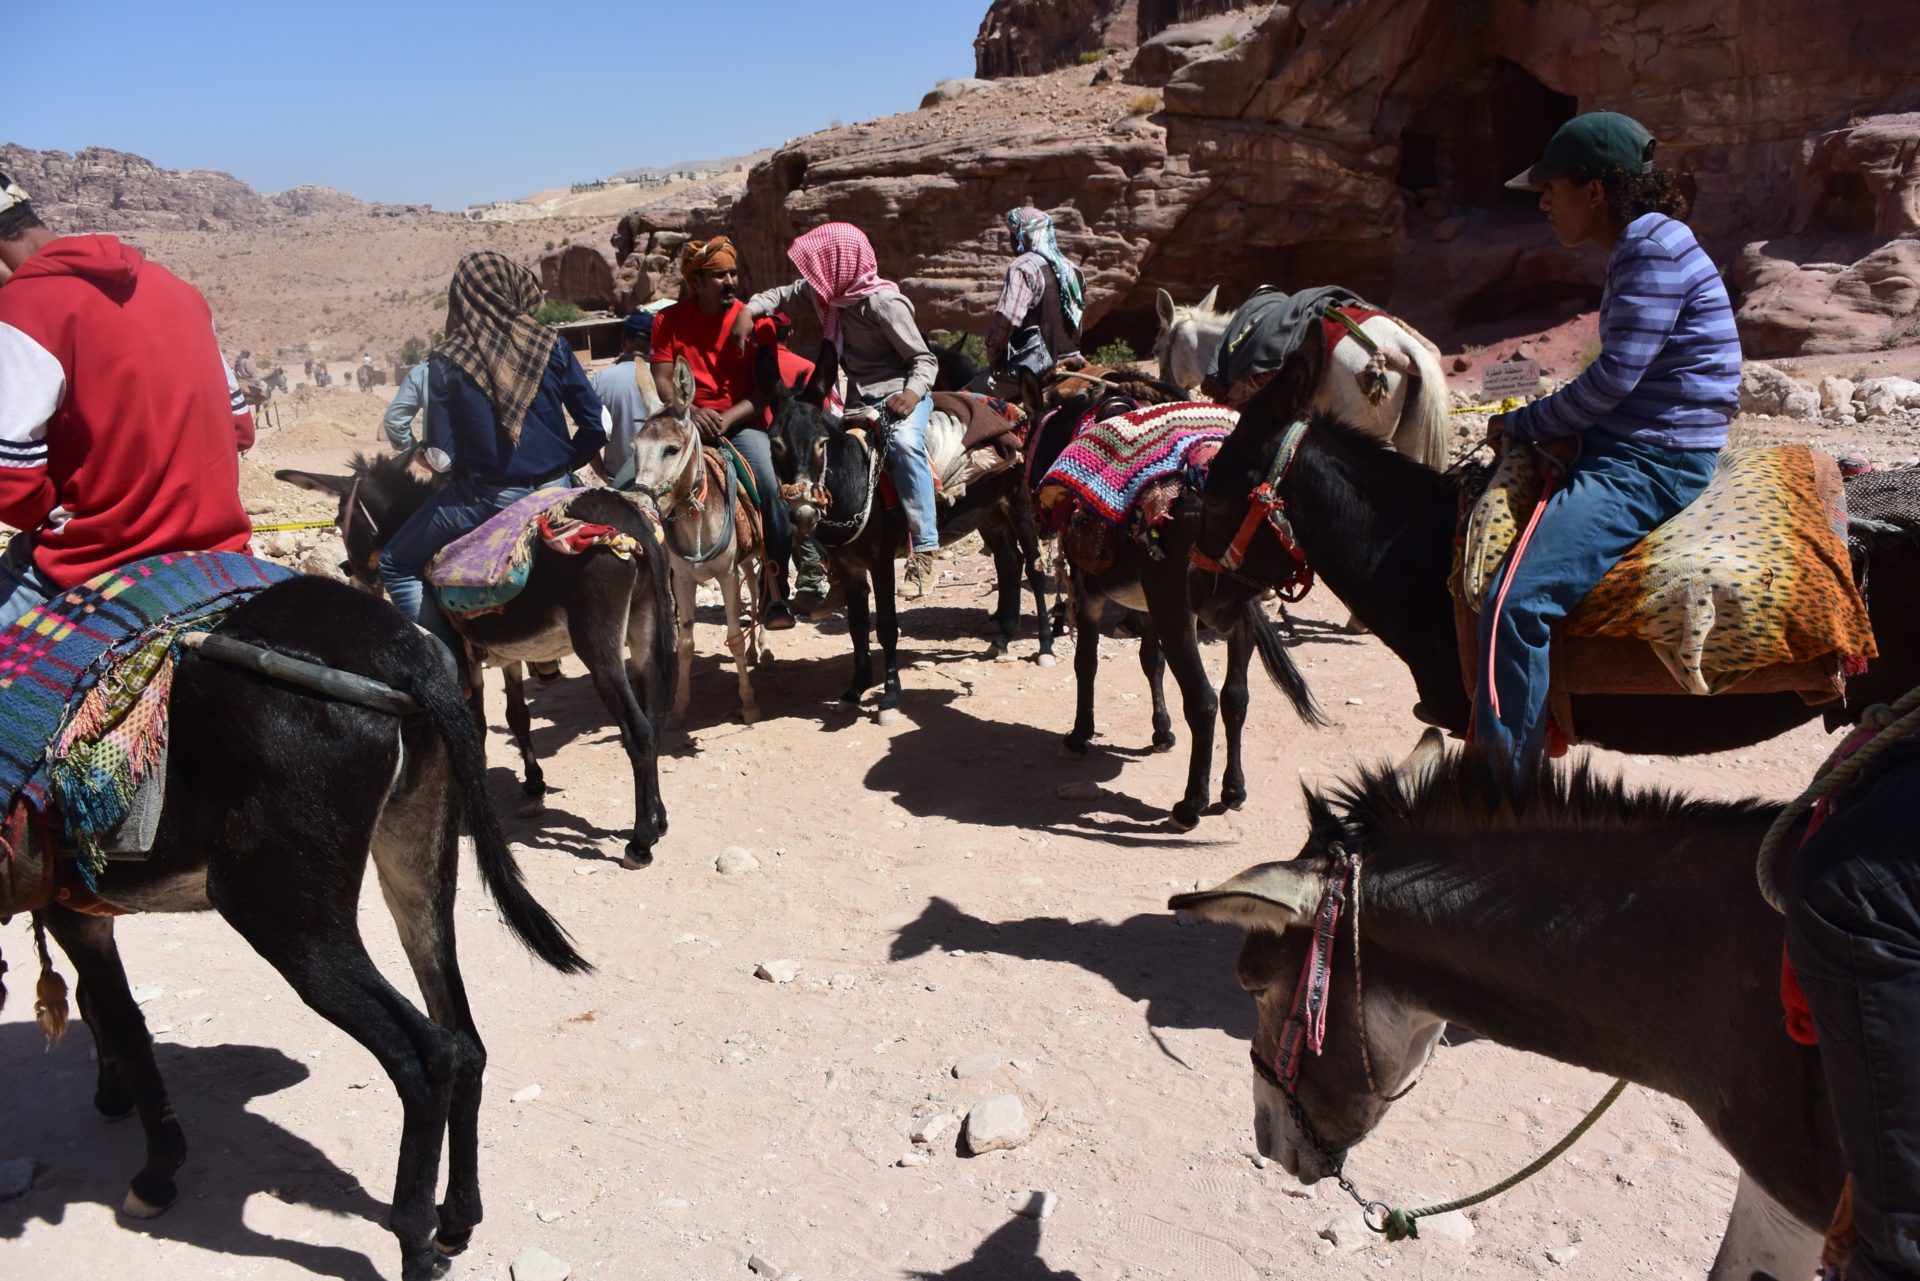 a group of people riding donkeys in a desert